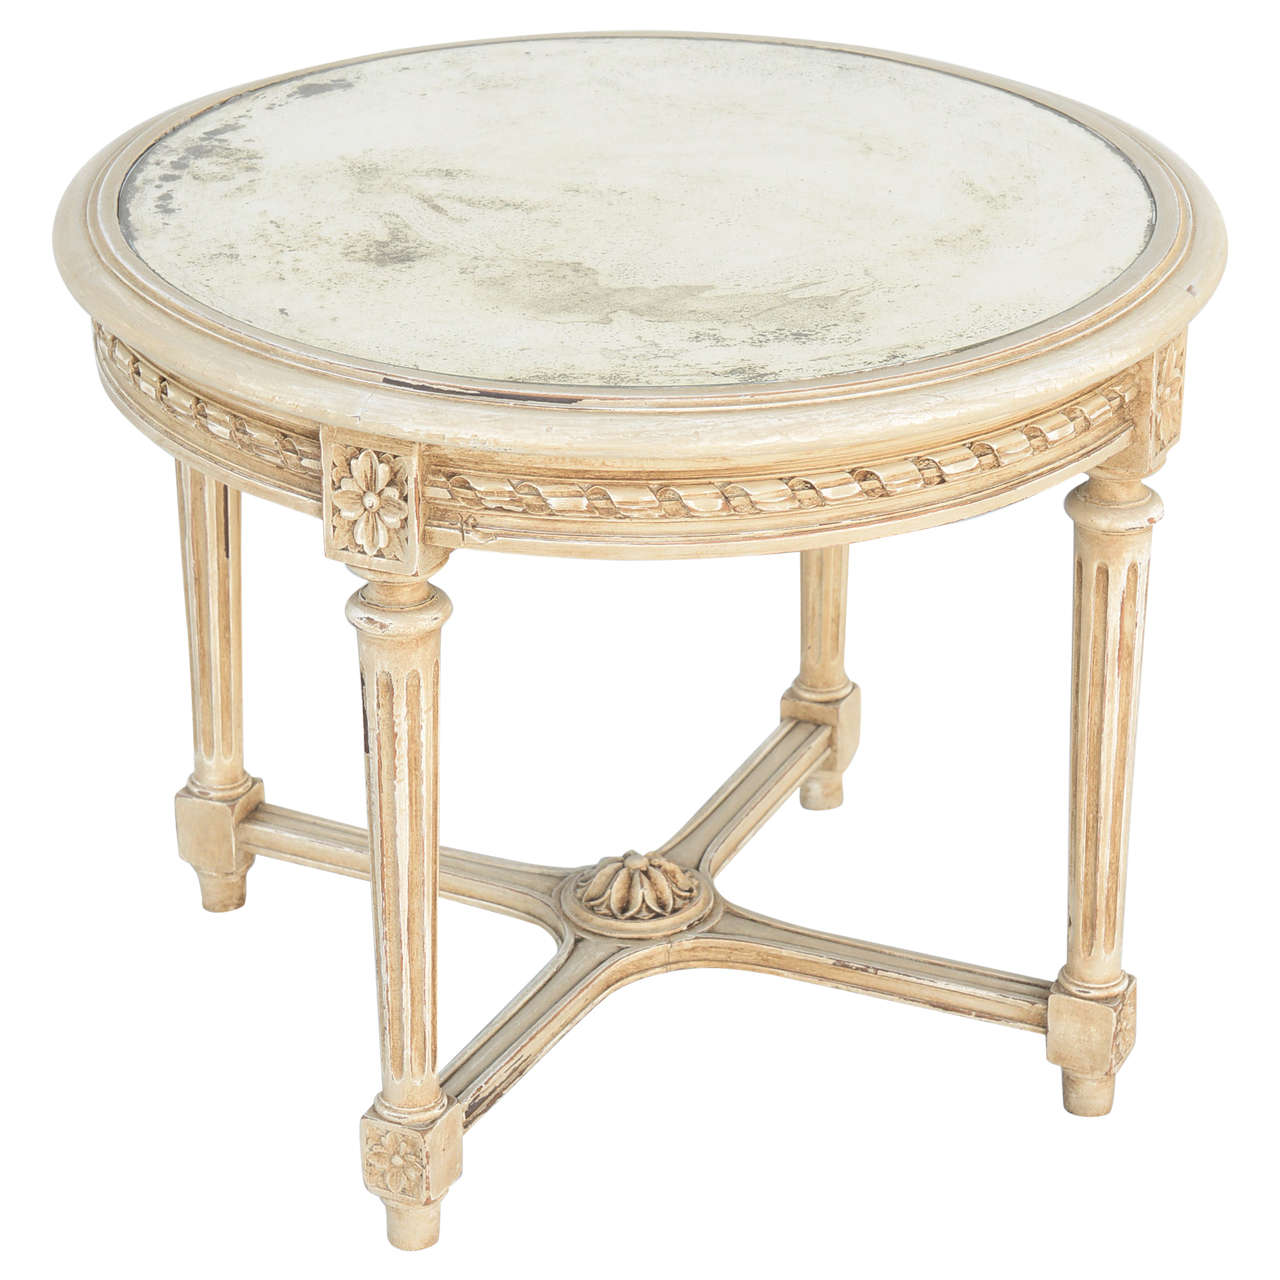 round painted louis xvi style accent table with mirrored half moon wood hand tables patio furniture las vegas modern coffee inch decorator big tablecloth outdoor folding end glass